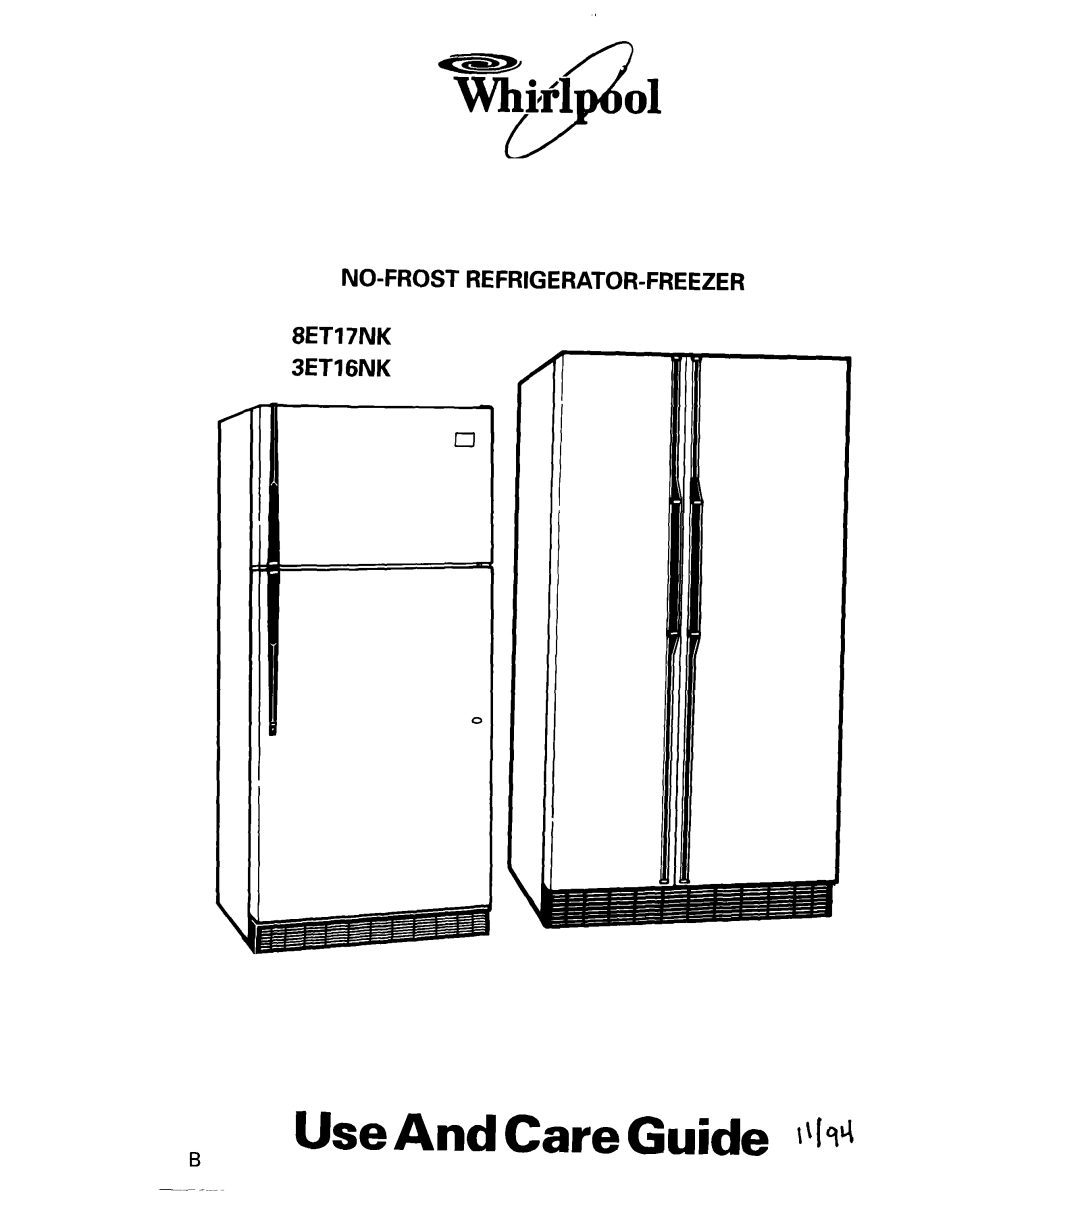 Whirlpool manual Use And Care Guide ~qq, NO-FROST REFRIGERATOR-FREEZER 8ET17NK 3ET16NK 